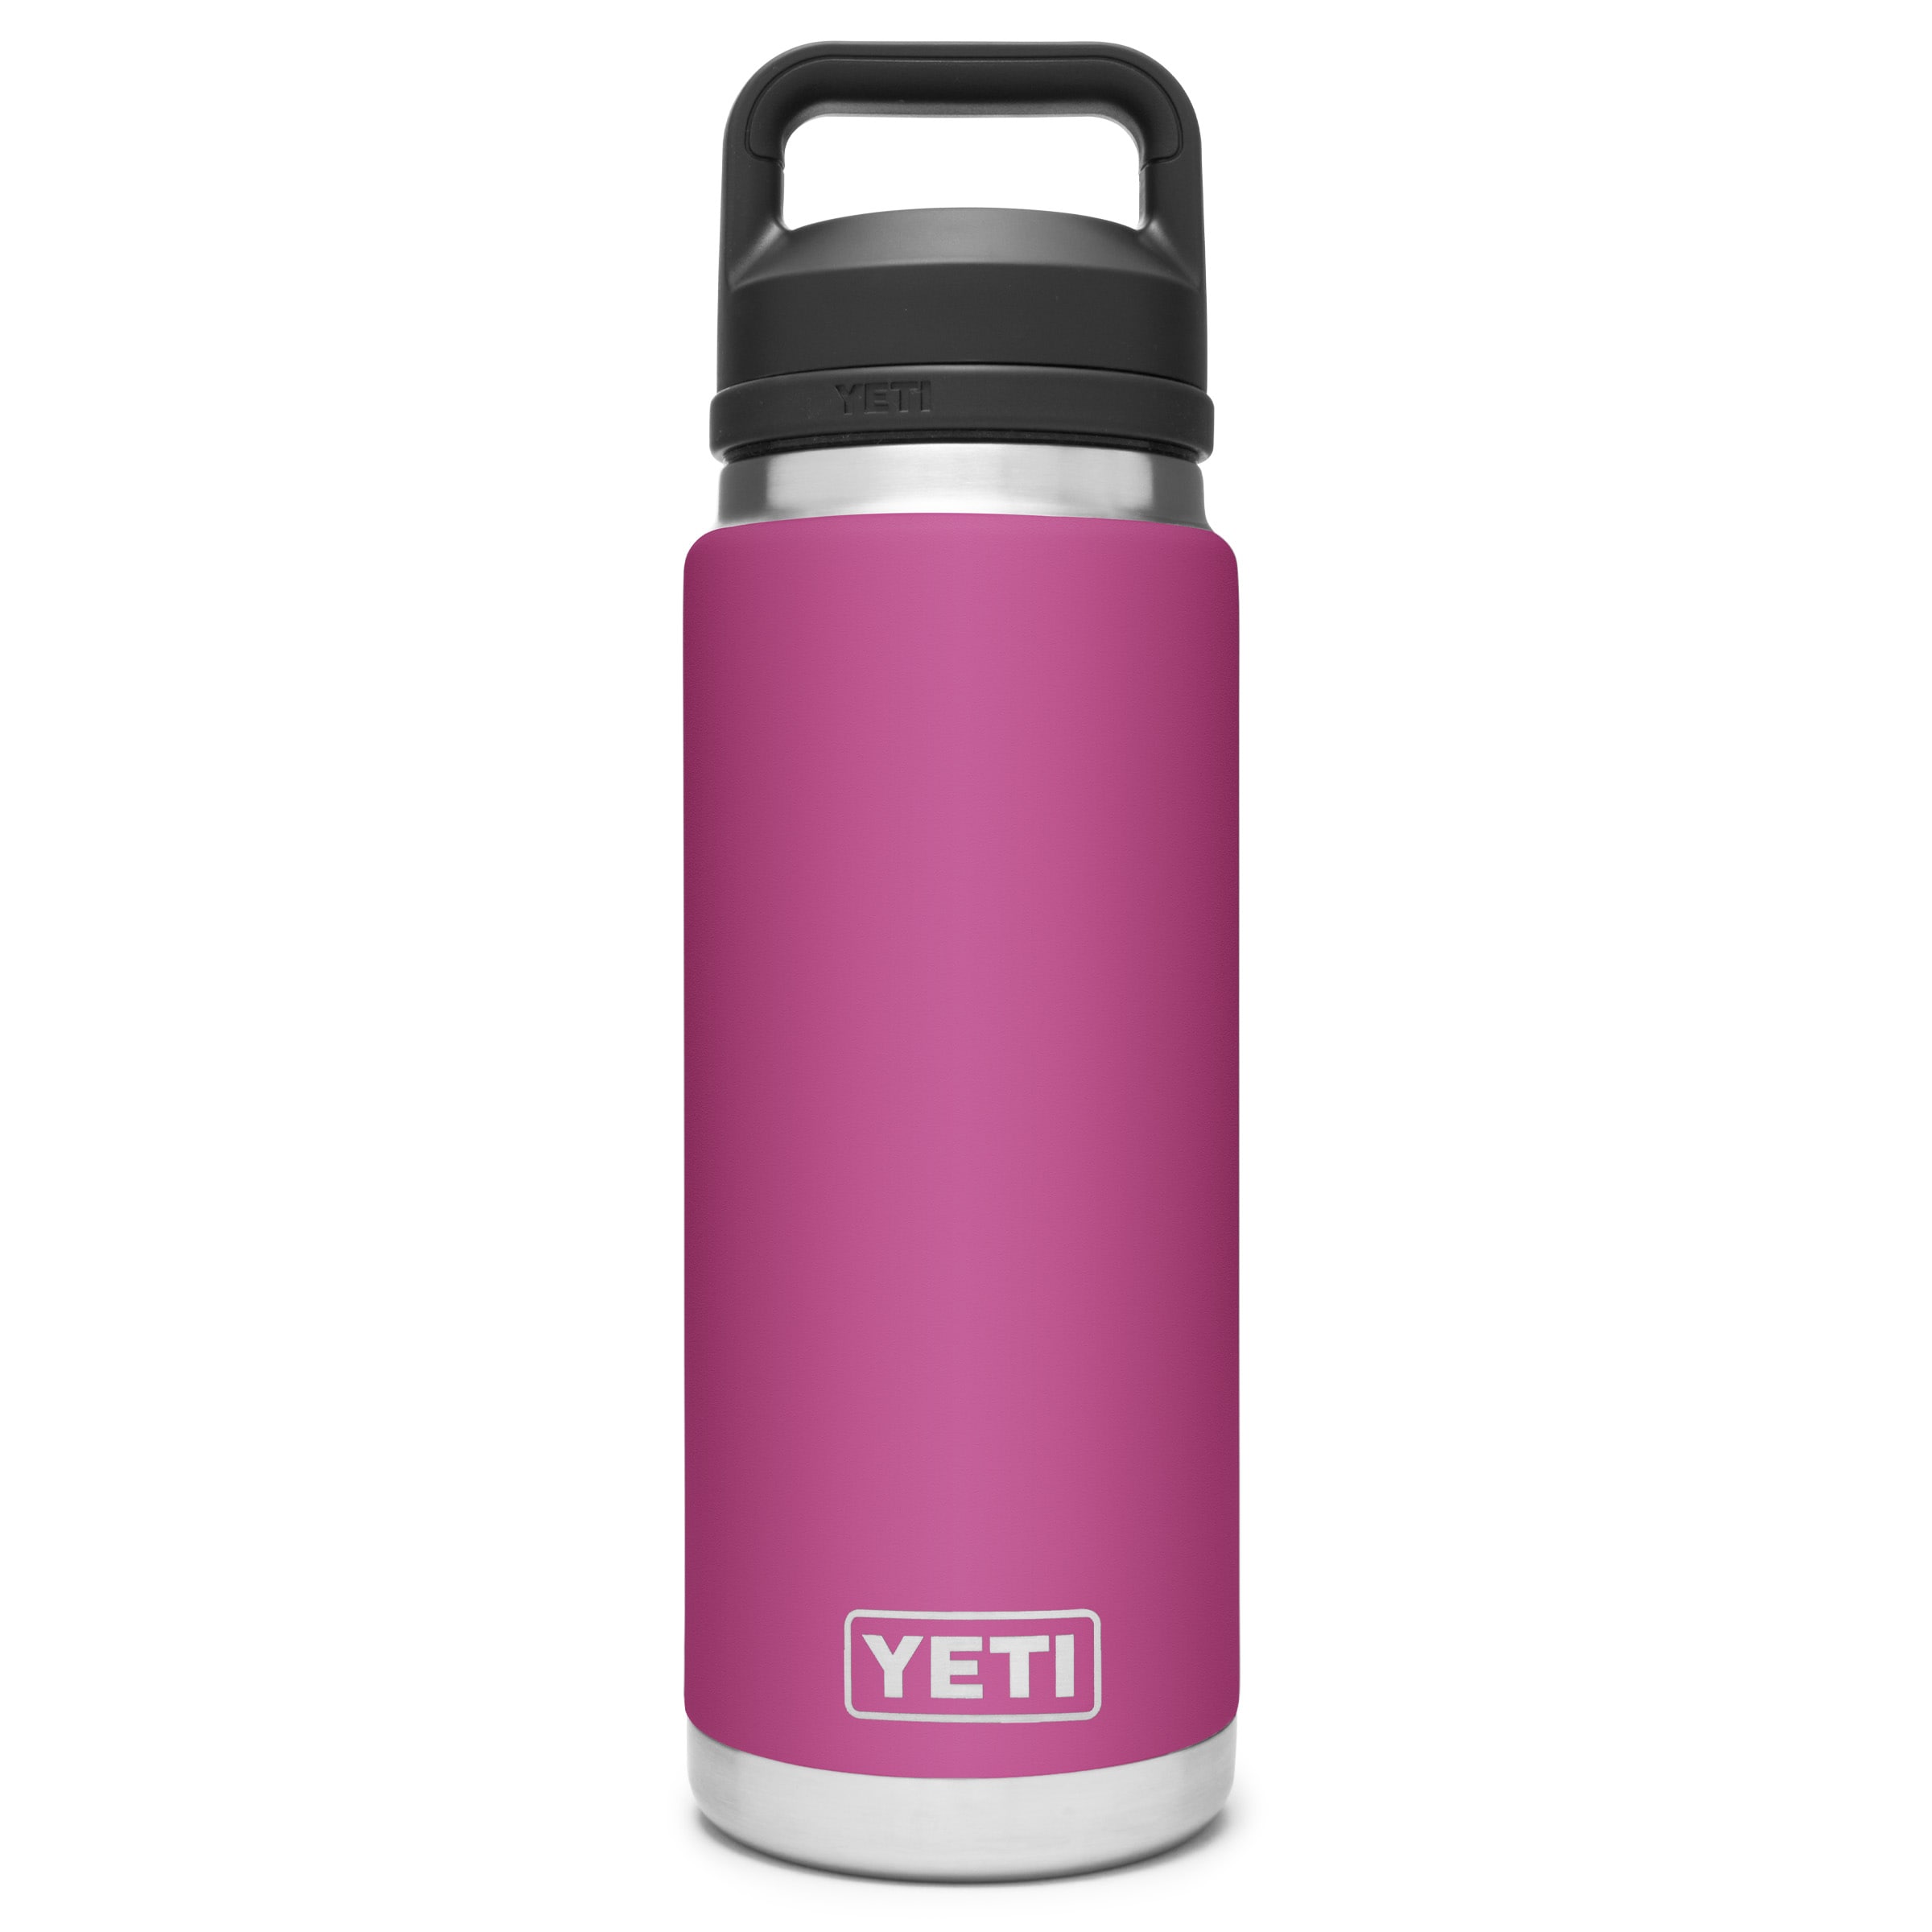 YETI Rambler 26 oz Bottle Stainless Steel LIMITED EDITION Pink